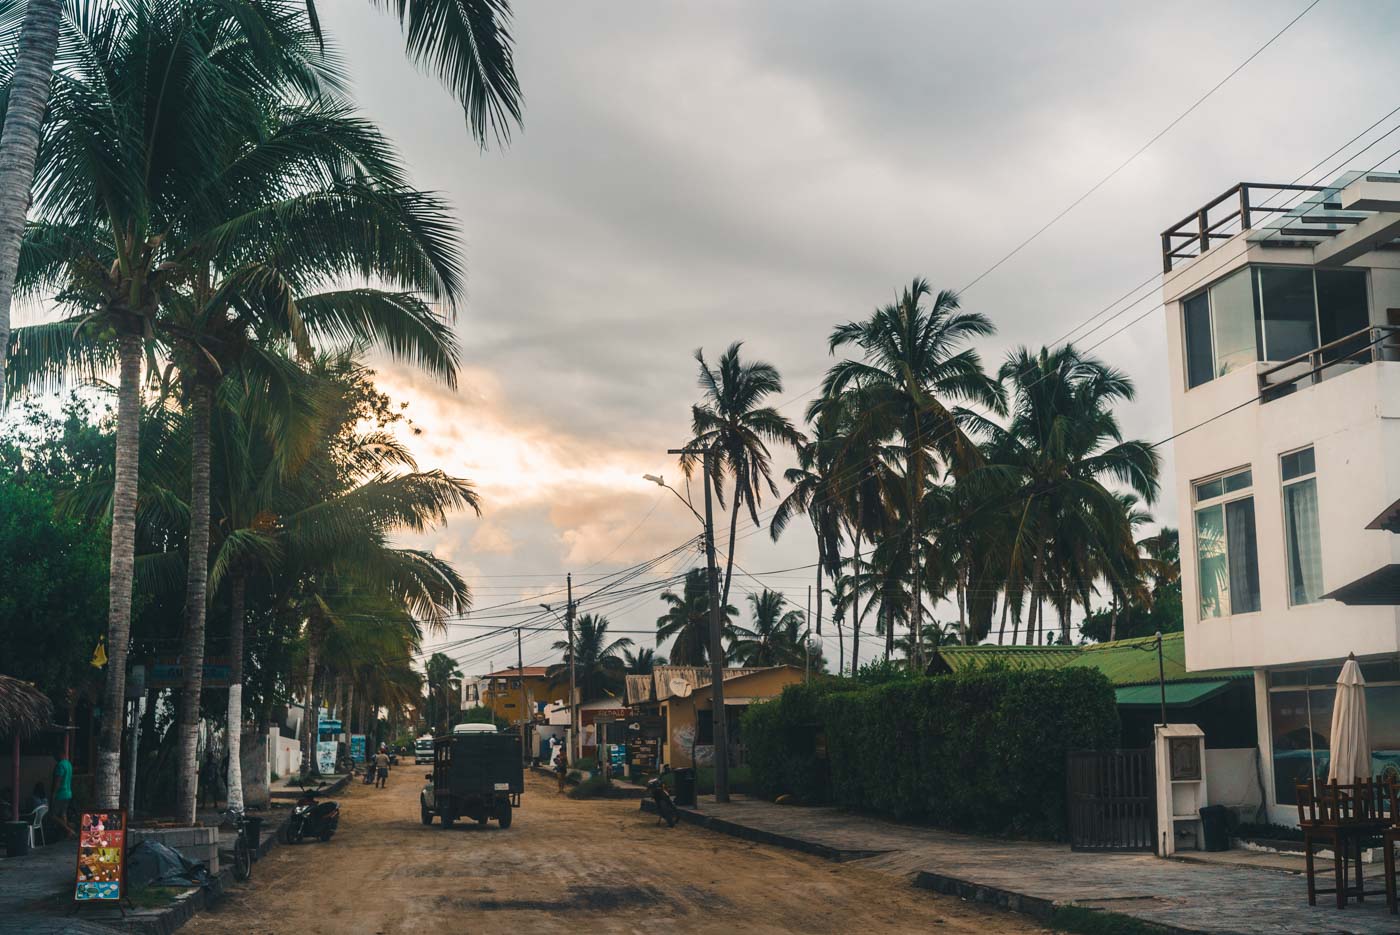 A quiet street on Isabela Island at sunset